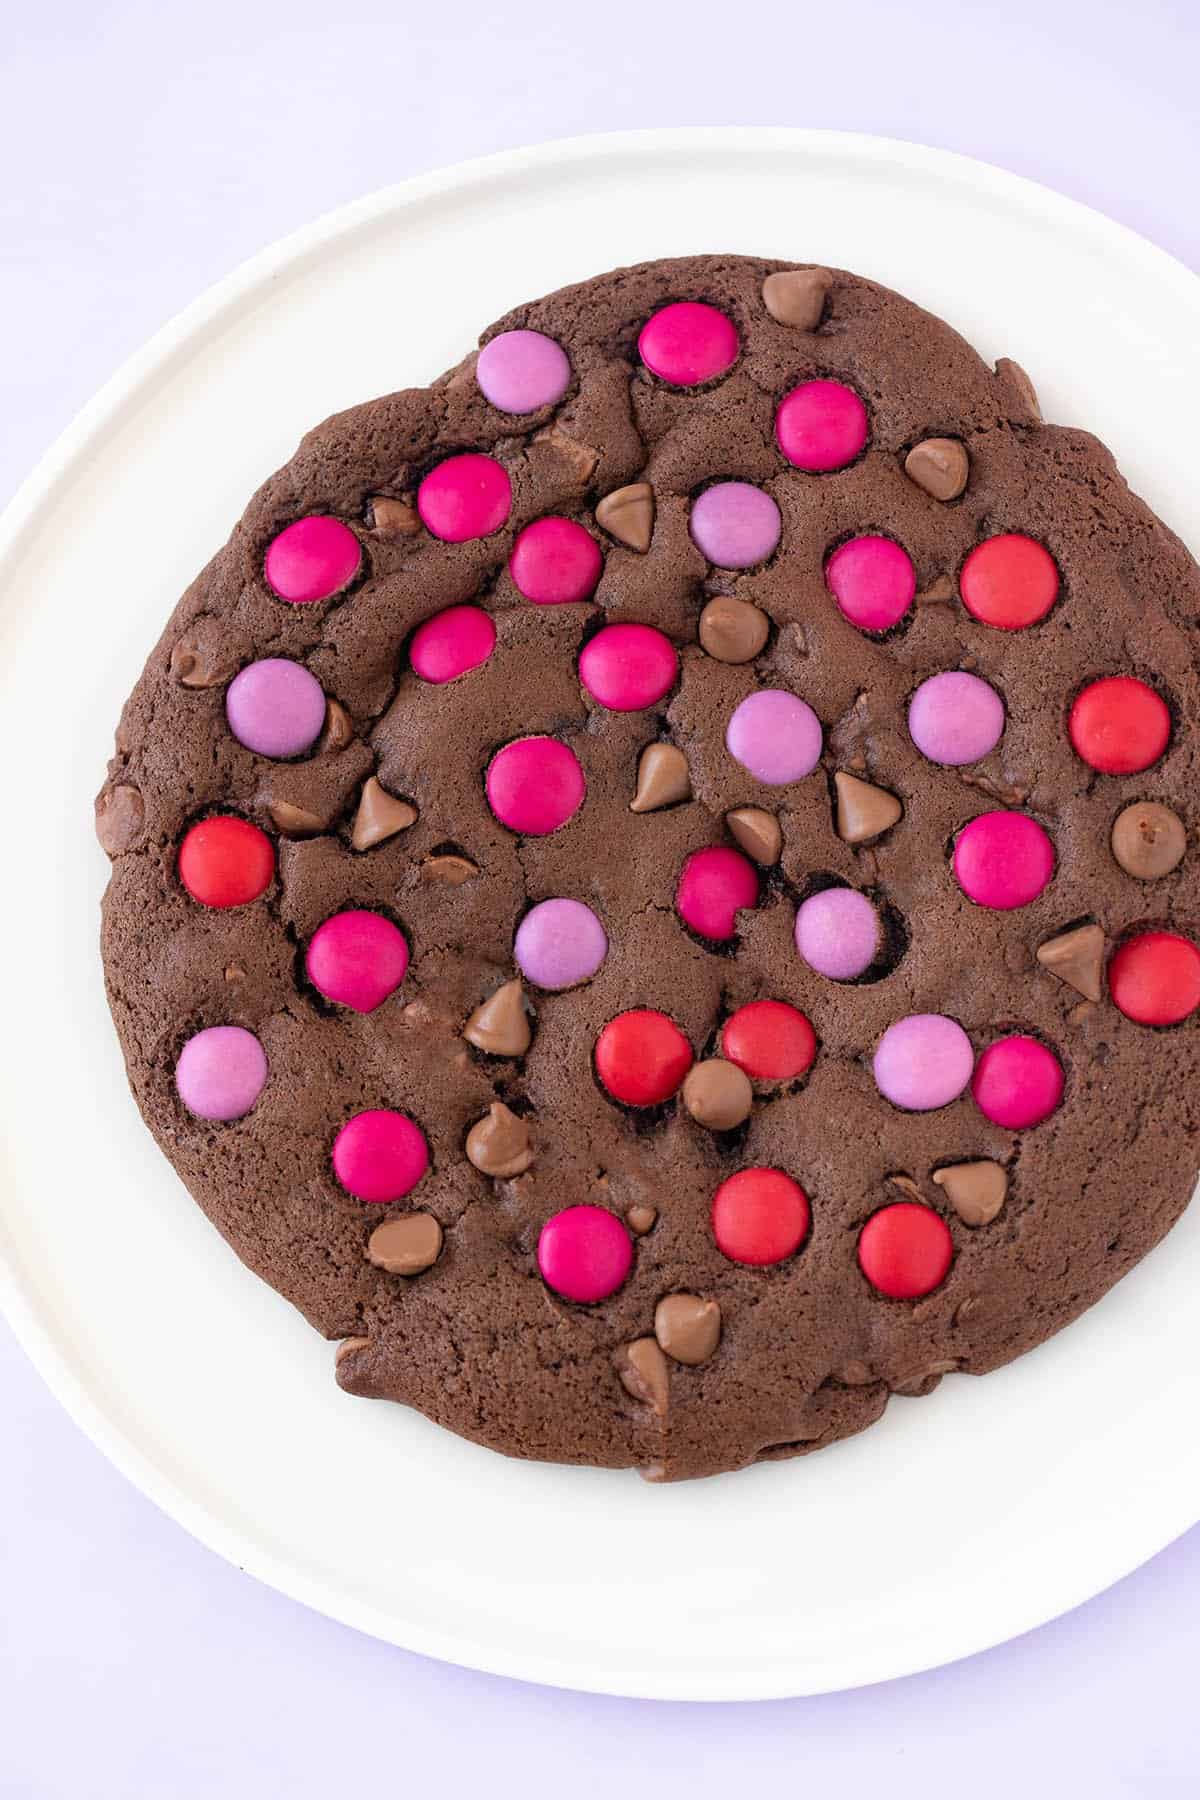 A giant chocolate cookie decorated with pink and purple candies.